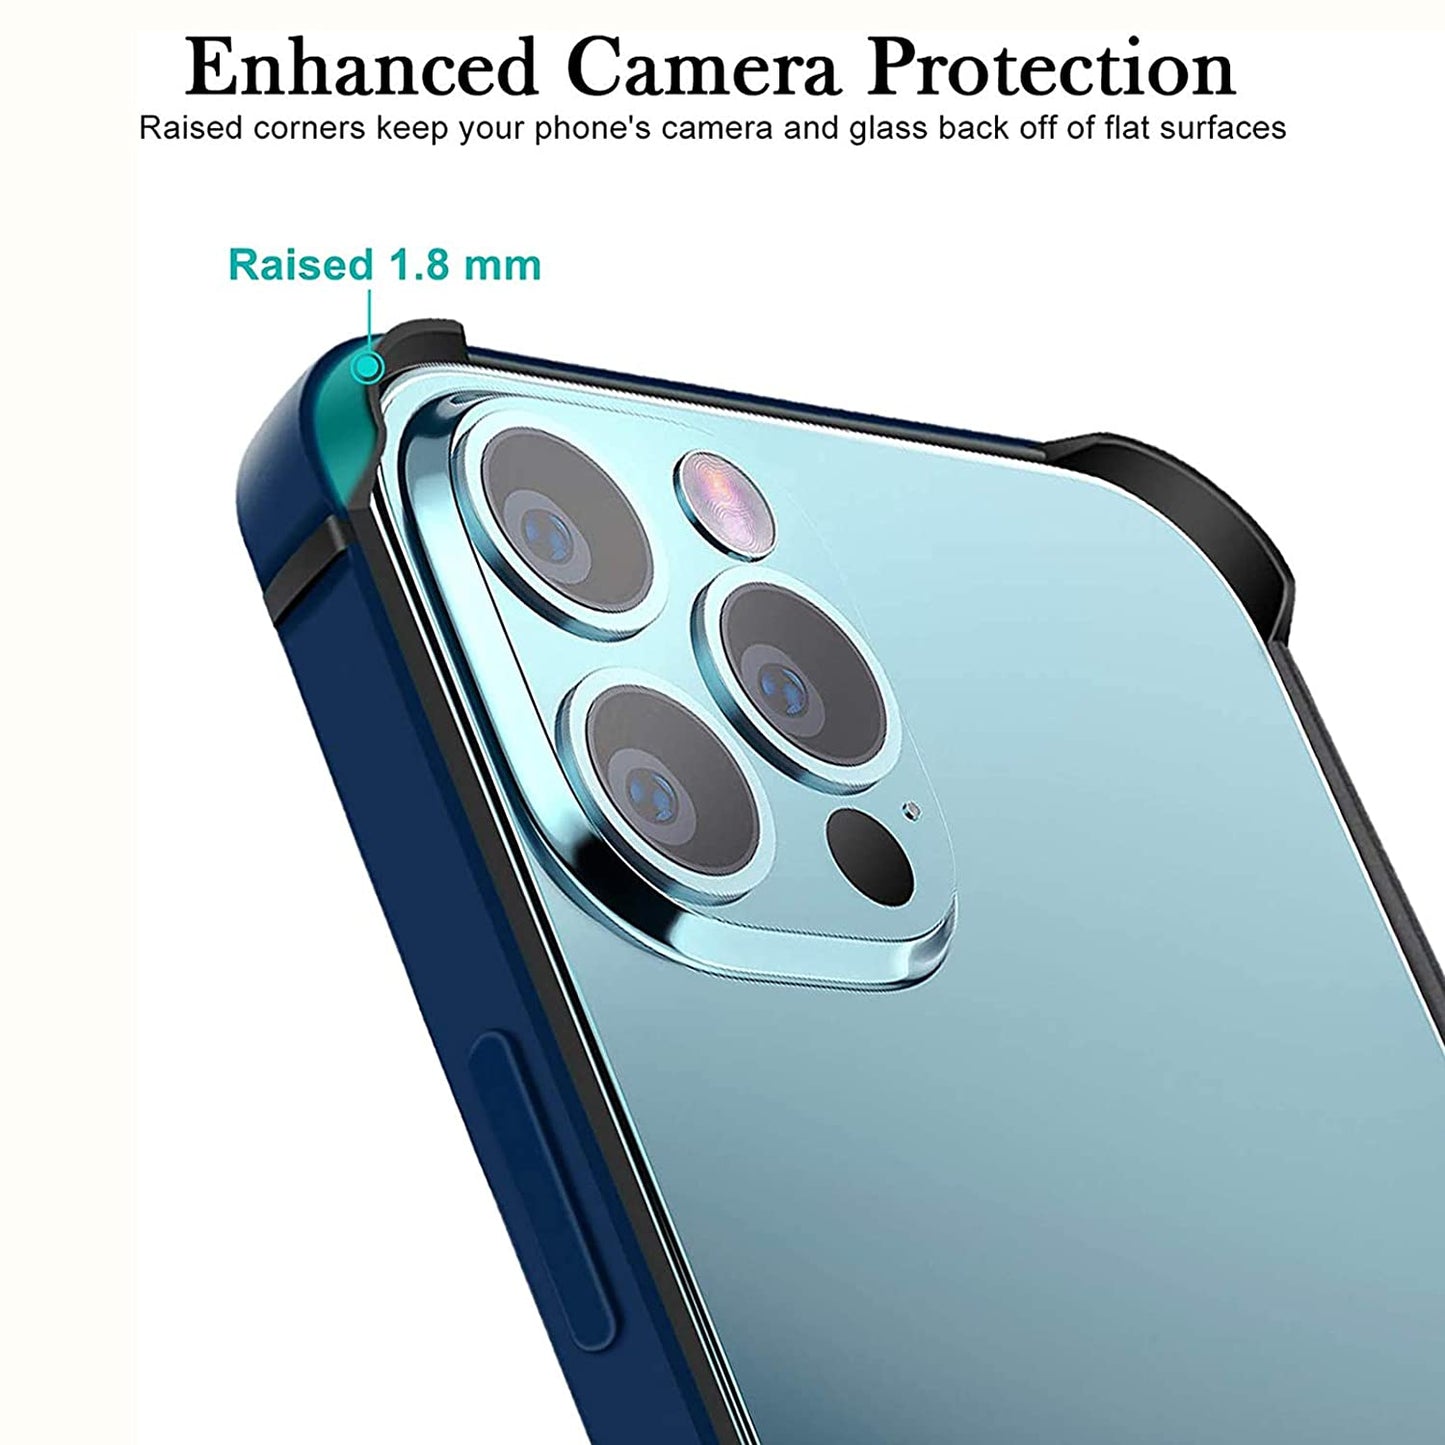 iPhone 14 Pro Max Bumper (Not a Case) Raised Bezels for Lens Protection.